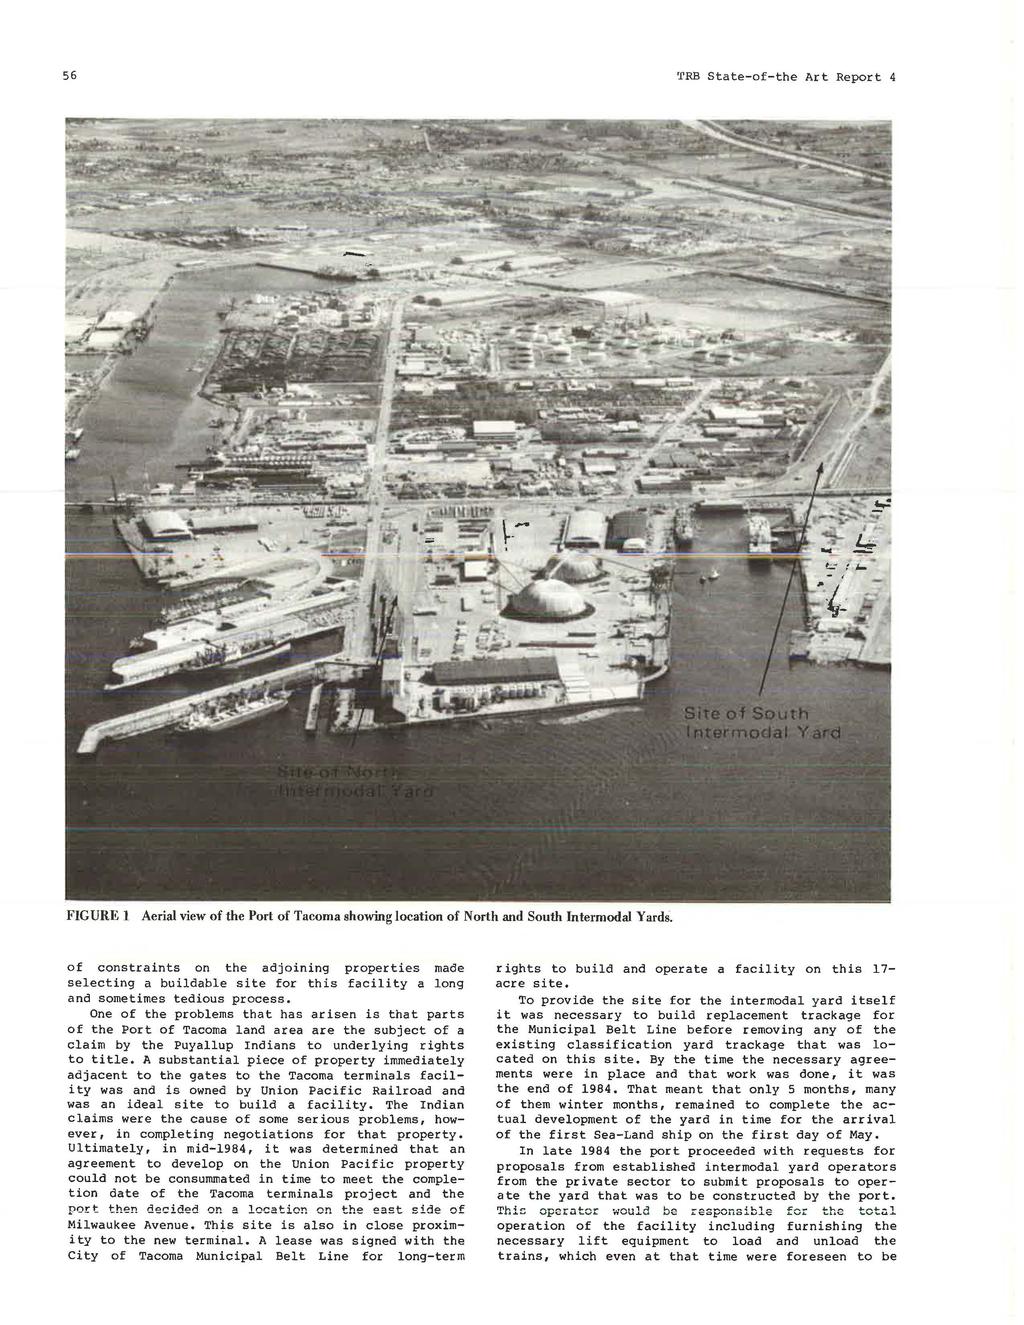 56 TRB State-of-the Art Report 4 FIG URE 1 Aerial view of the Port of Tacoma showing location of North and South Intermodal Yards.